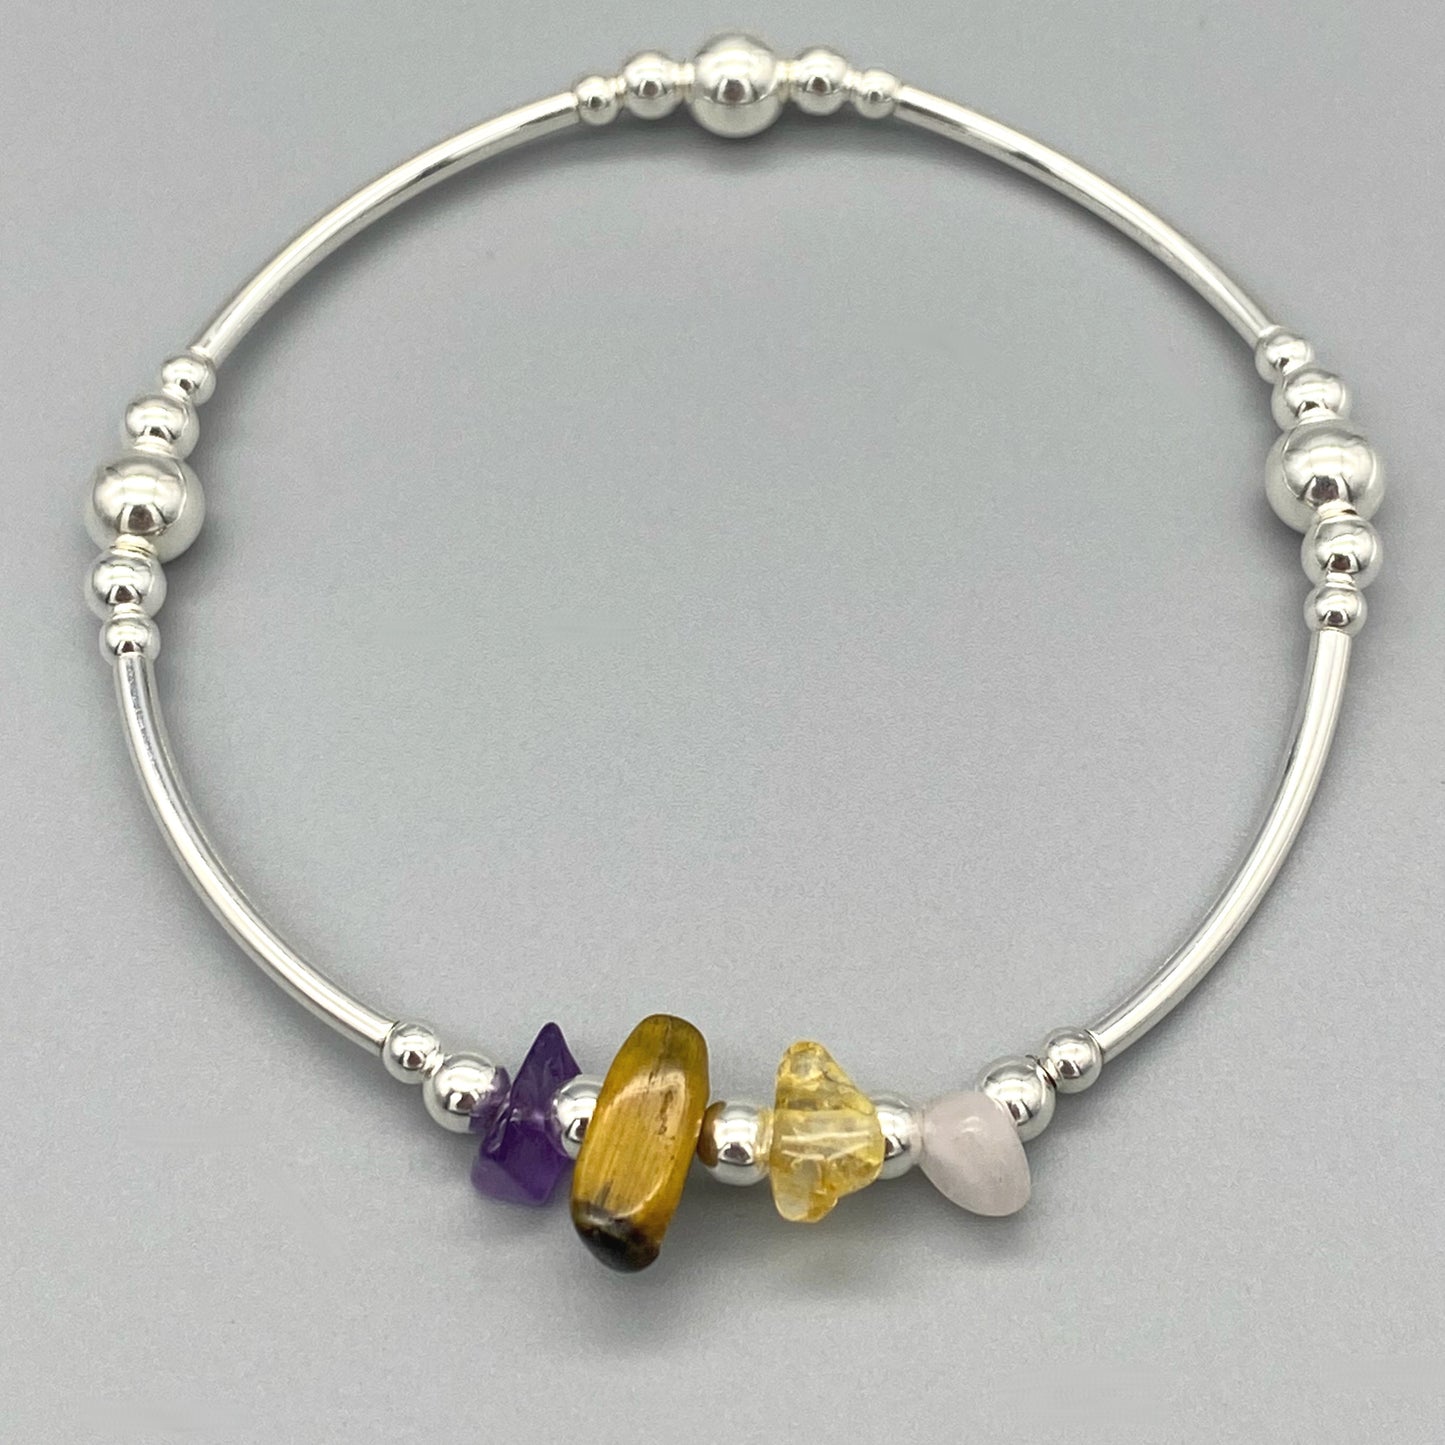 Menopause Support Healing Crystal Chips Sterling Silver Stacking Bracelet by My Silver Wish